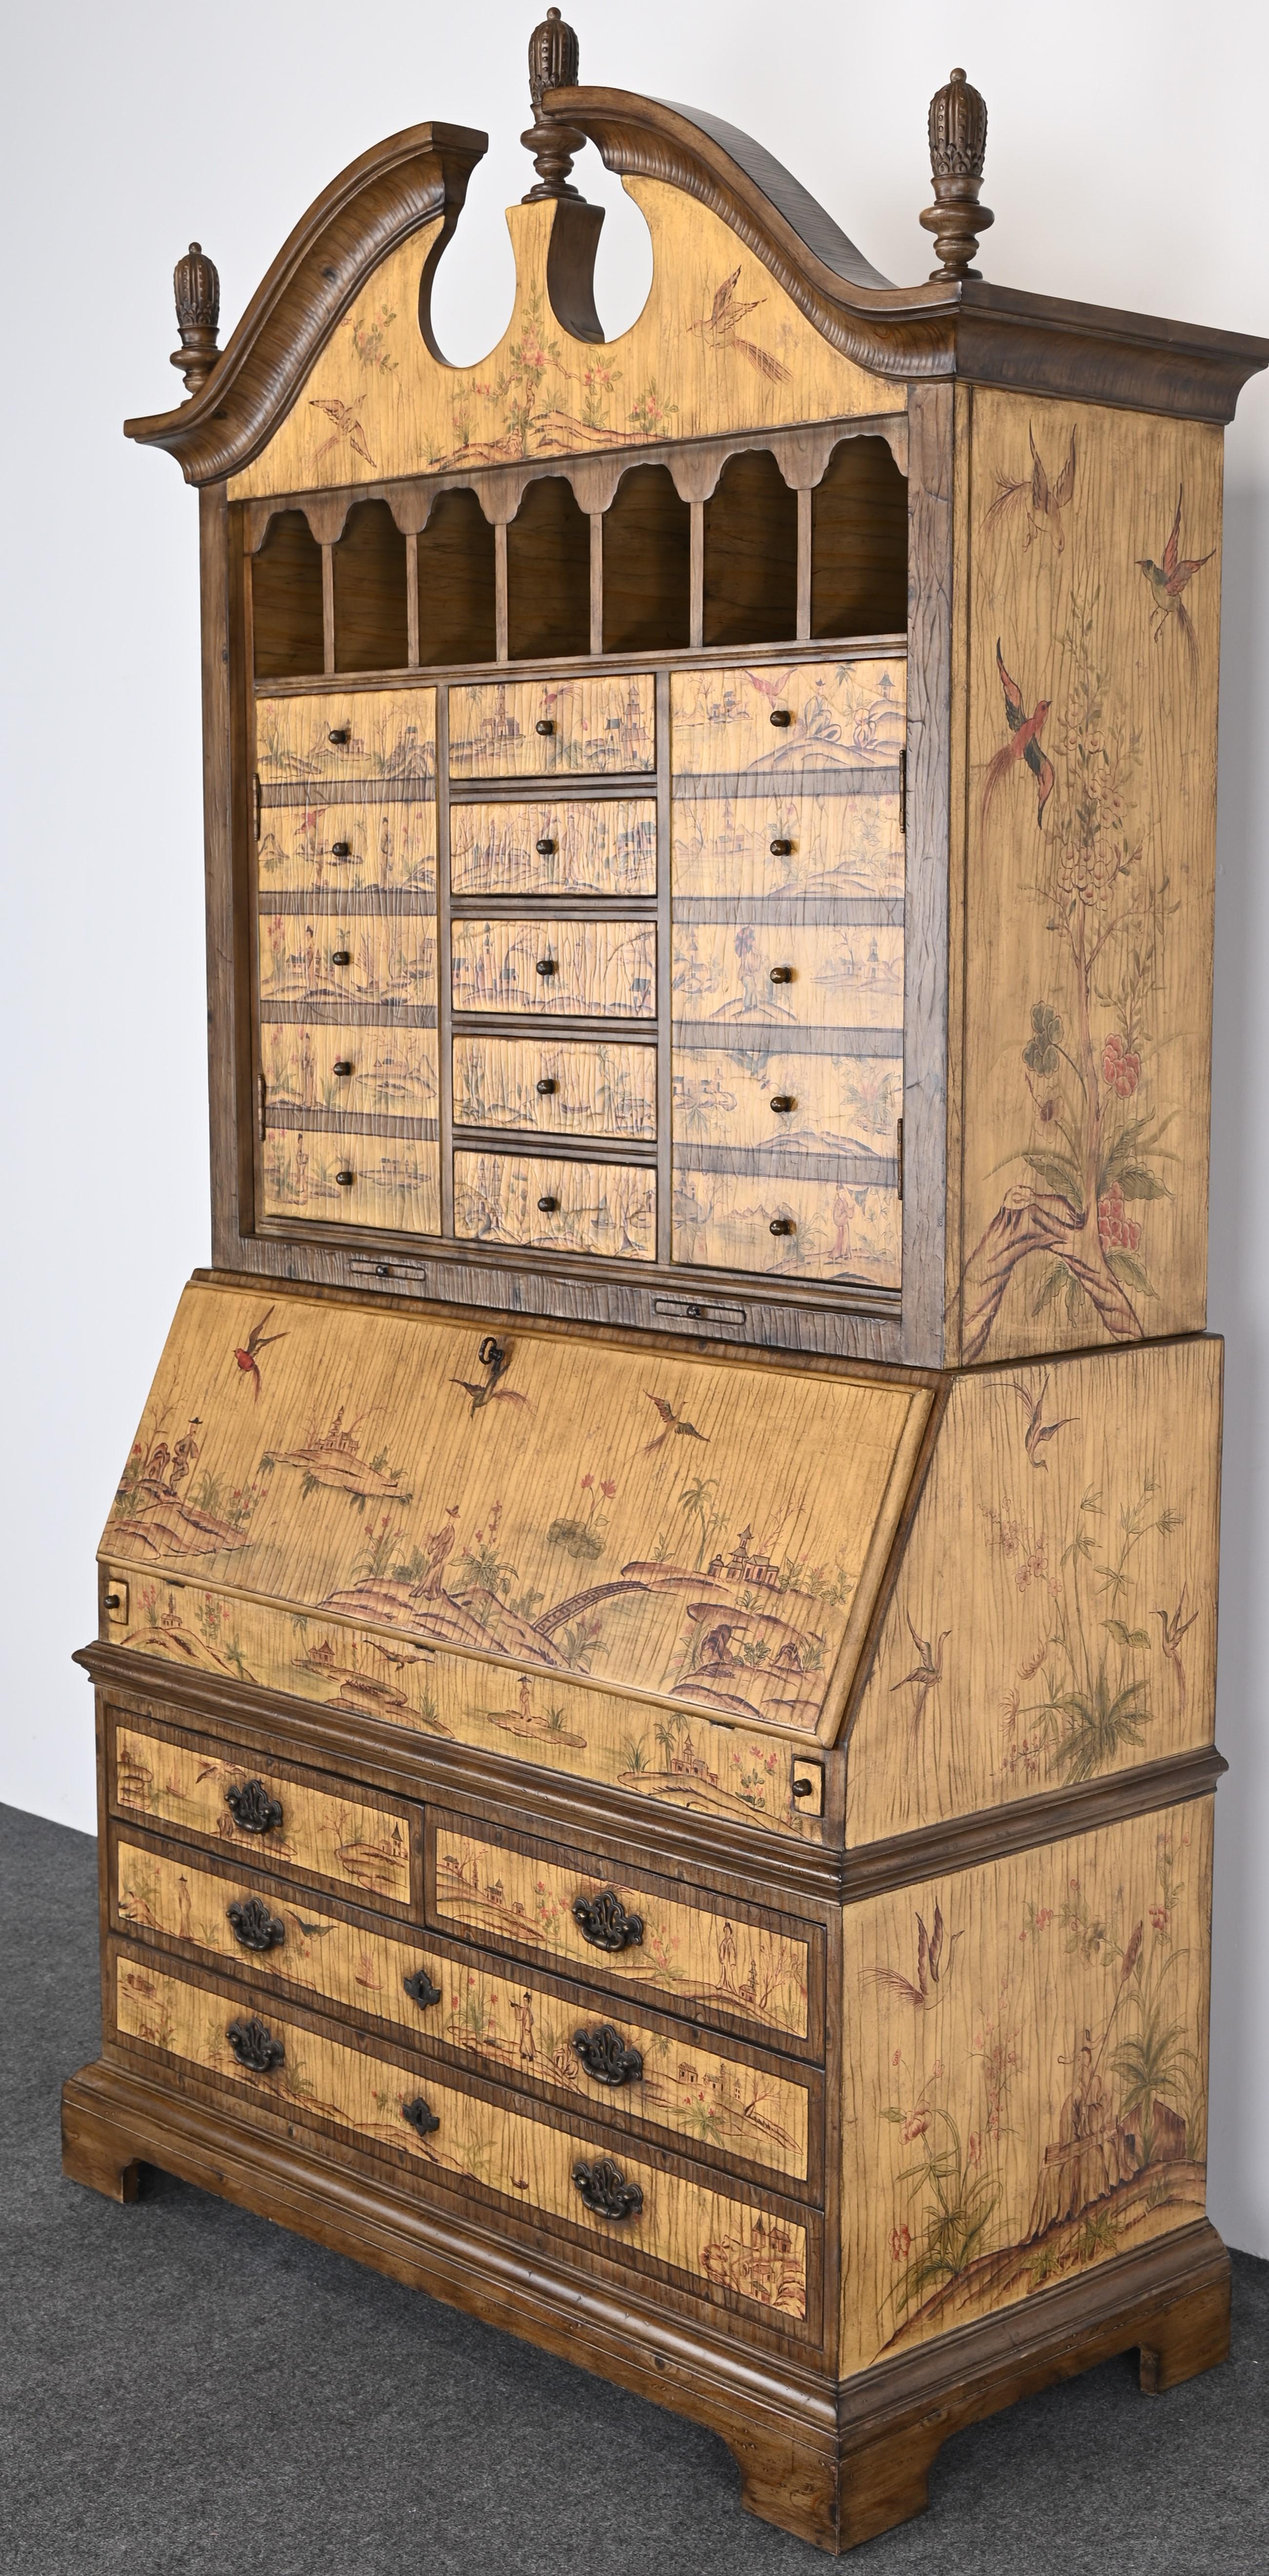 A fabulous Asian-made decorated Chinoiserie Secretary with painted flowers and birds. A great statement piece to decorate a room around. Nice scale and style with plenty of storage, desk, drawers, and cubby holes. Would look great in any interior